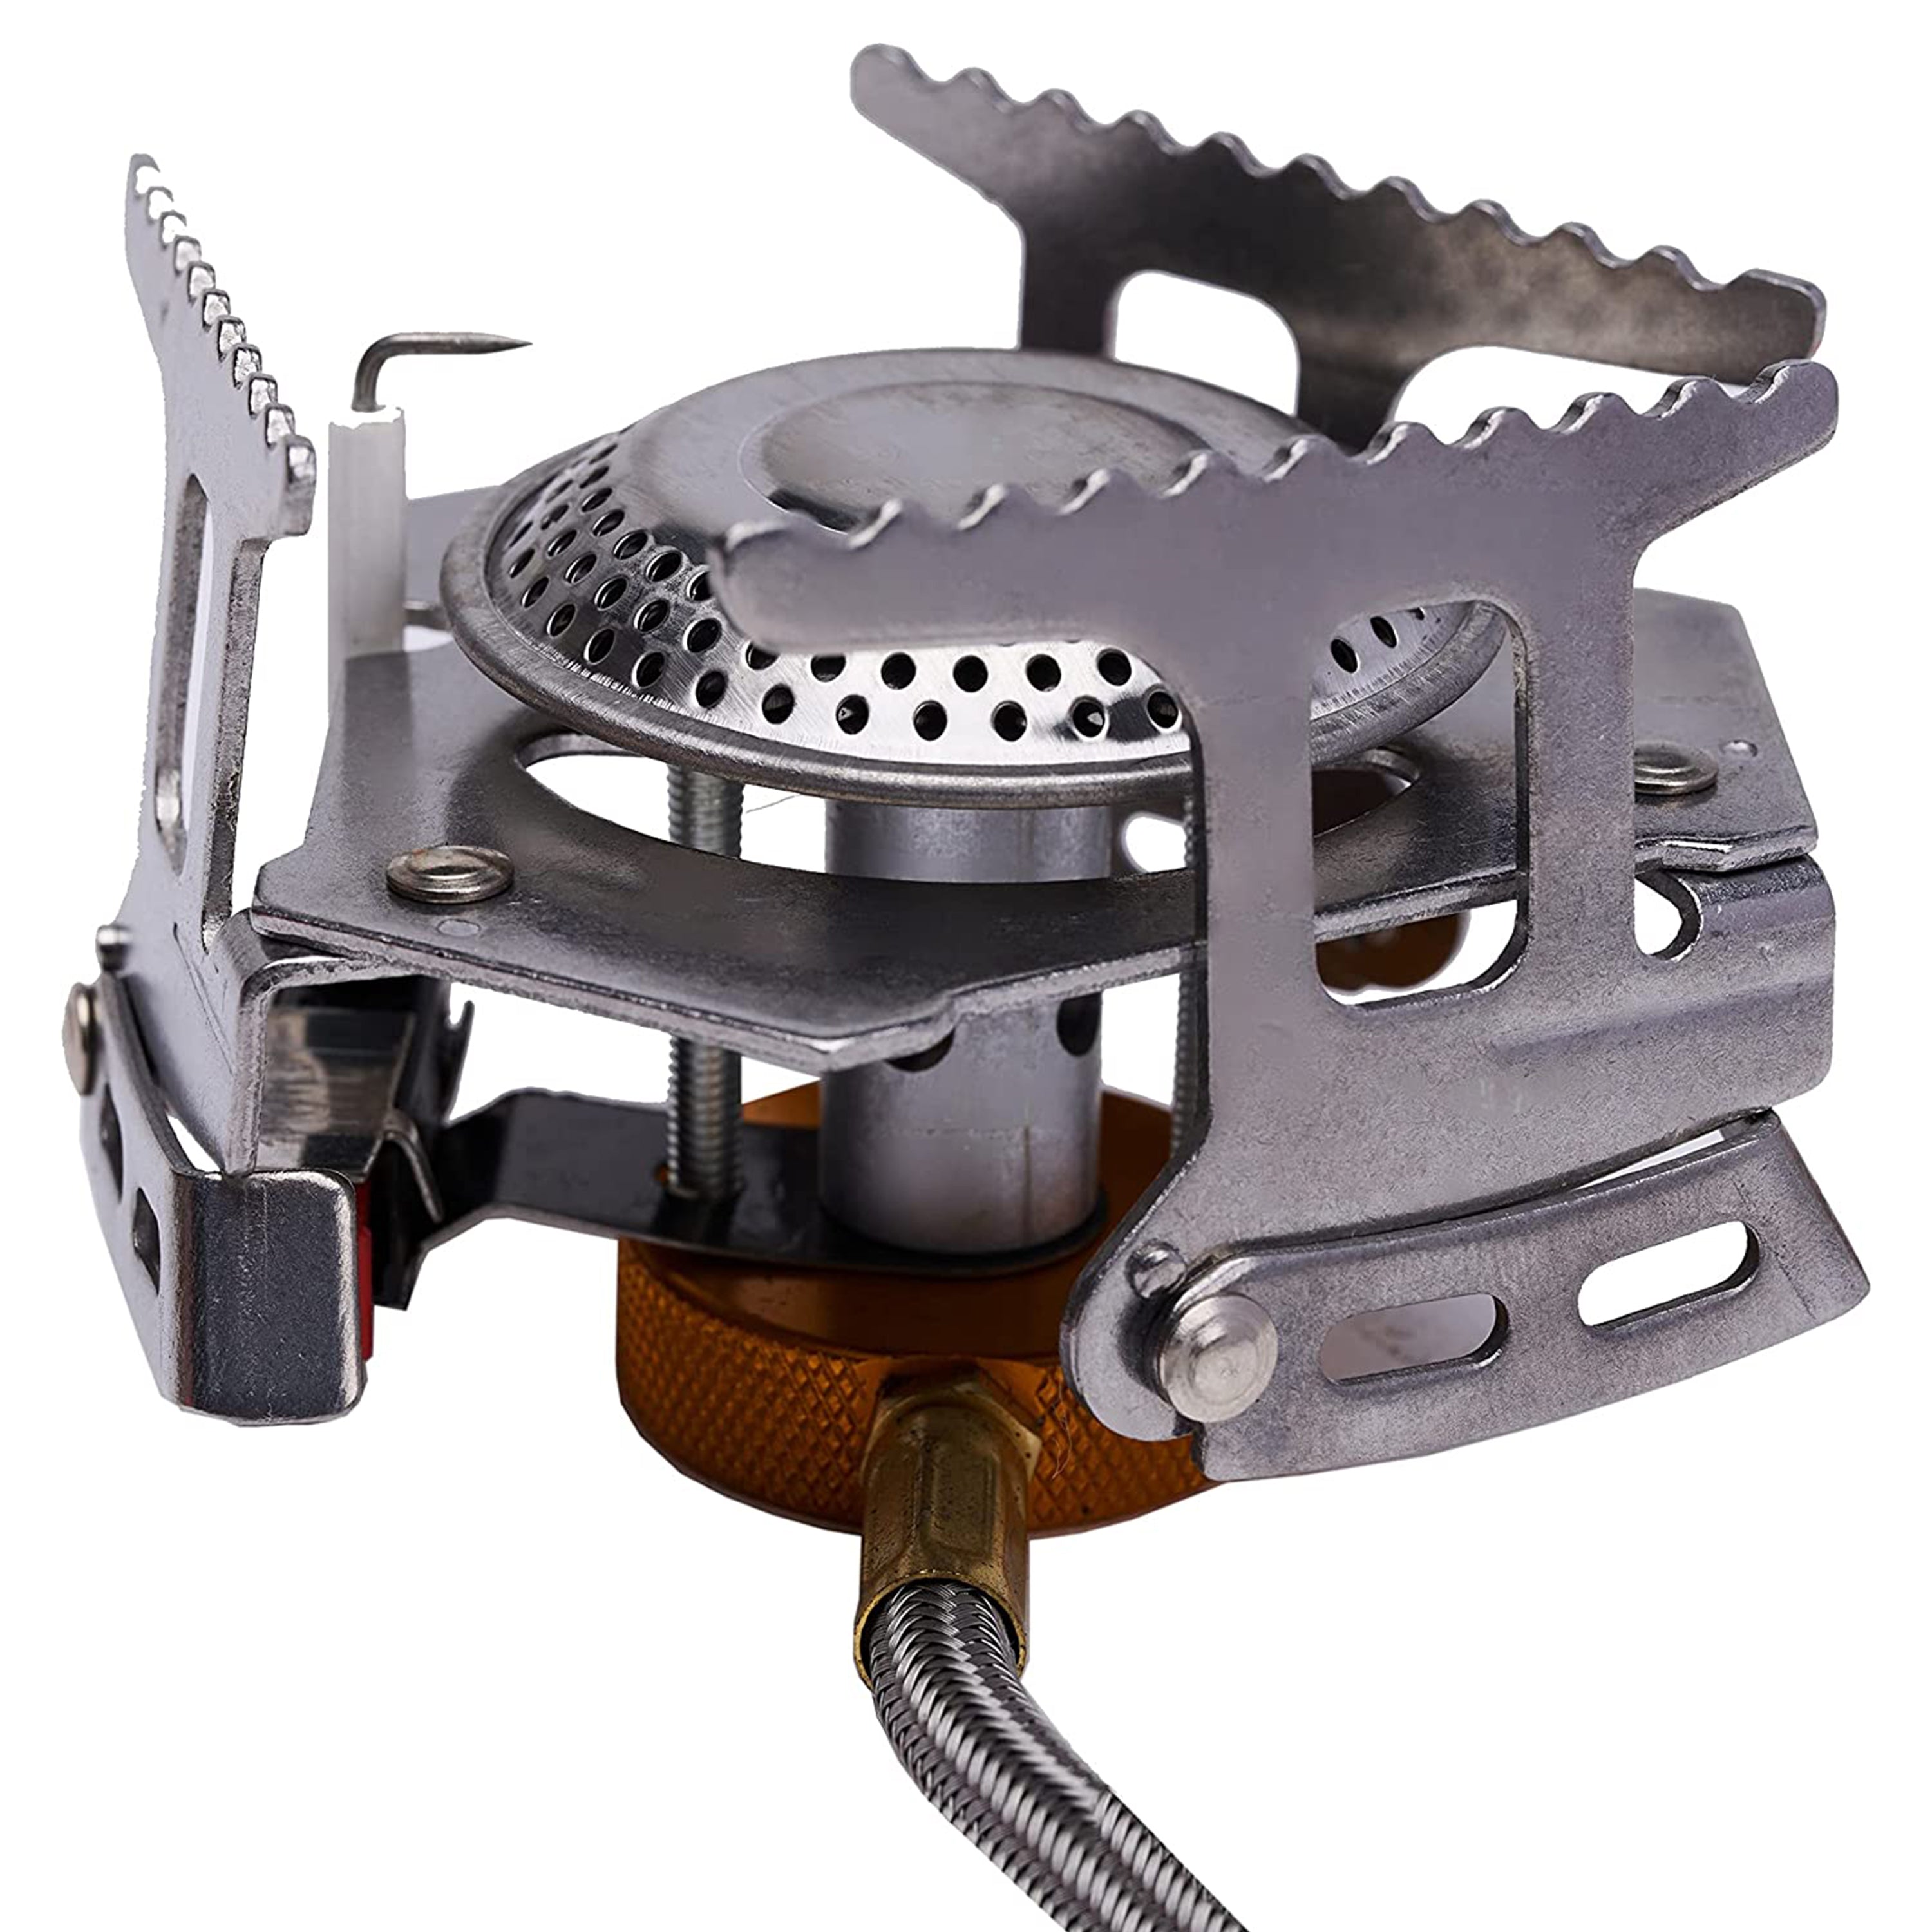 AMOS Eezy Foldable Camping Gas Stove